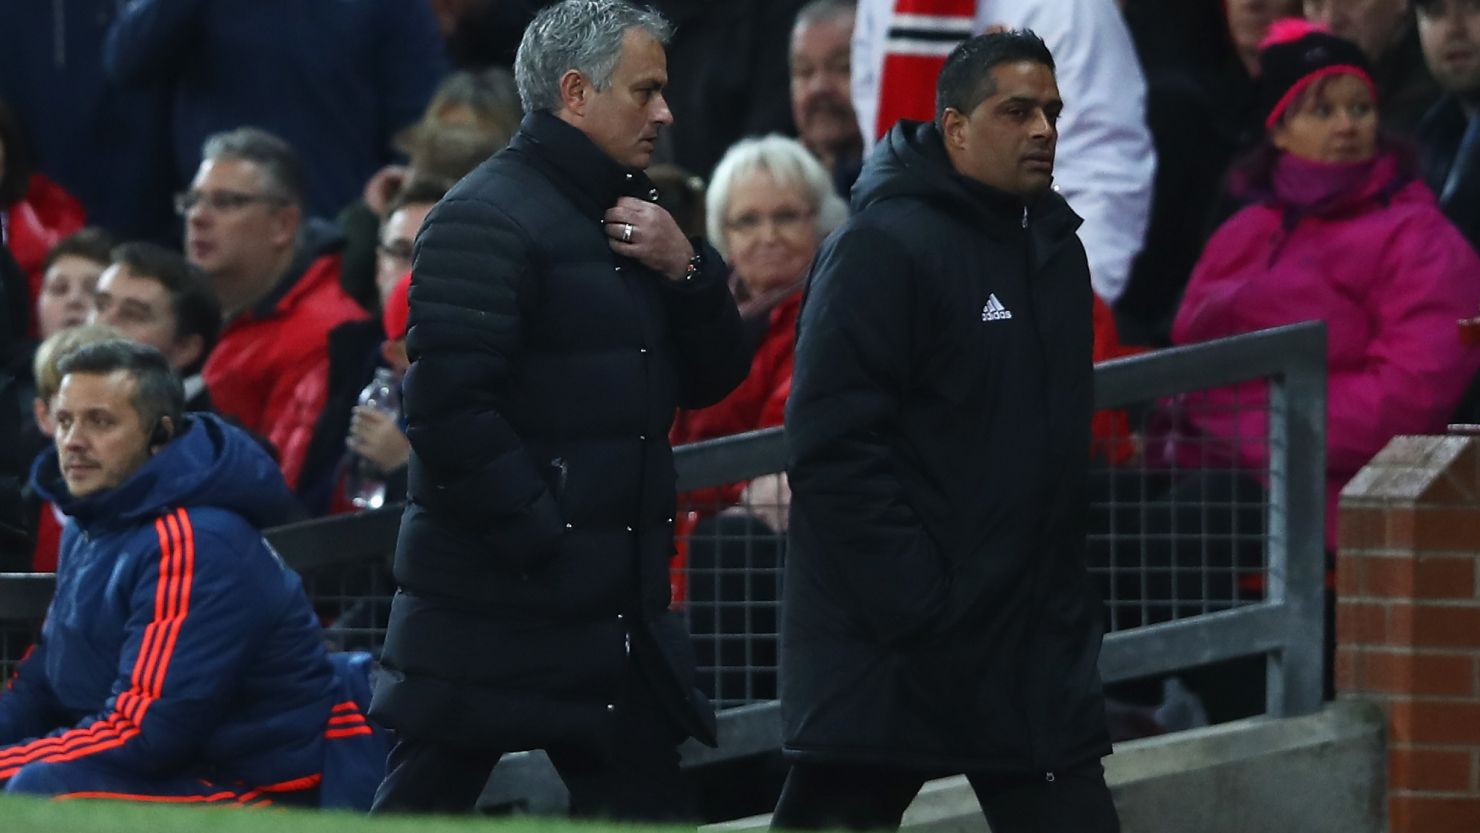 Jose Mourinho makes his way to the stands shortly after being sent off by referee Jonathan Moss. 